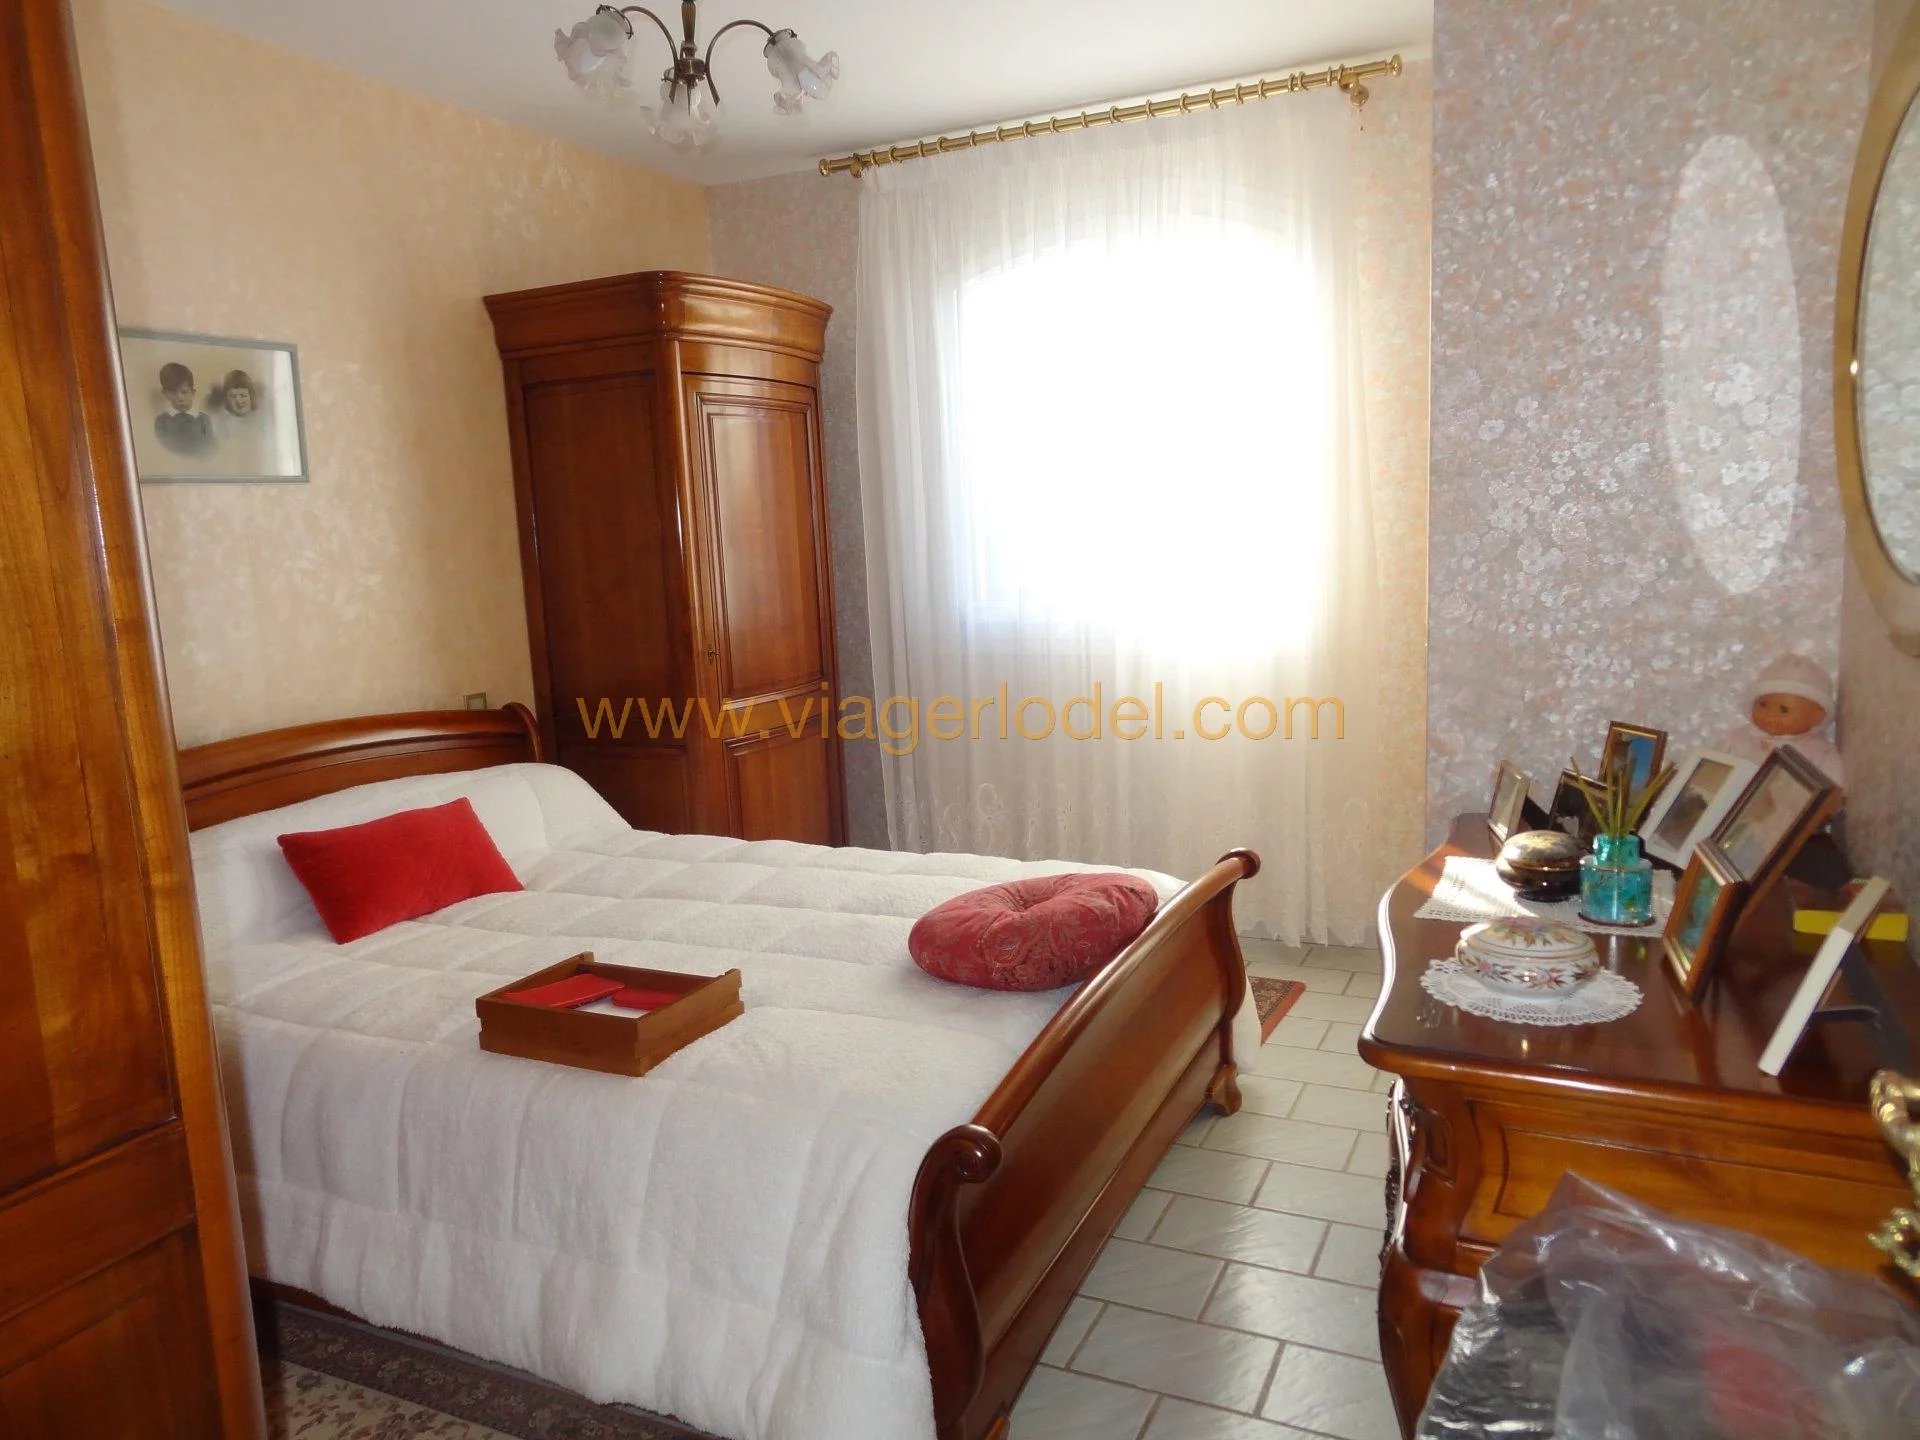 Ref. : 9042 - LIFE ANNUITY - OCCUPIED 5-room HOUSE - COULOBRES (34)